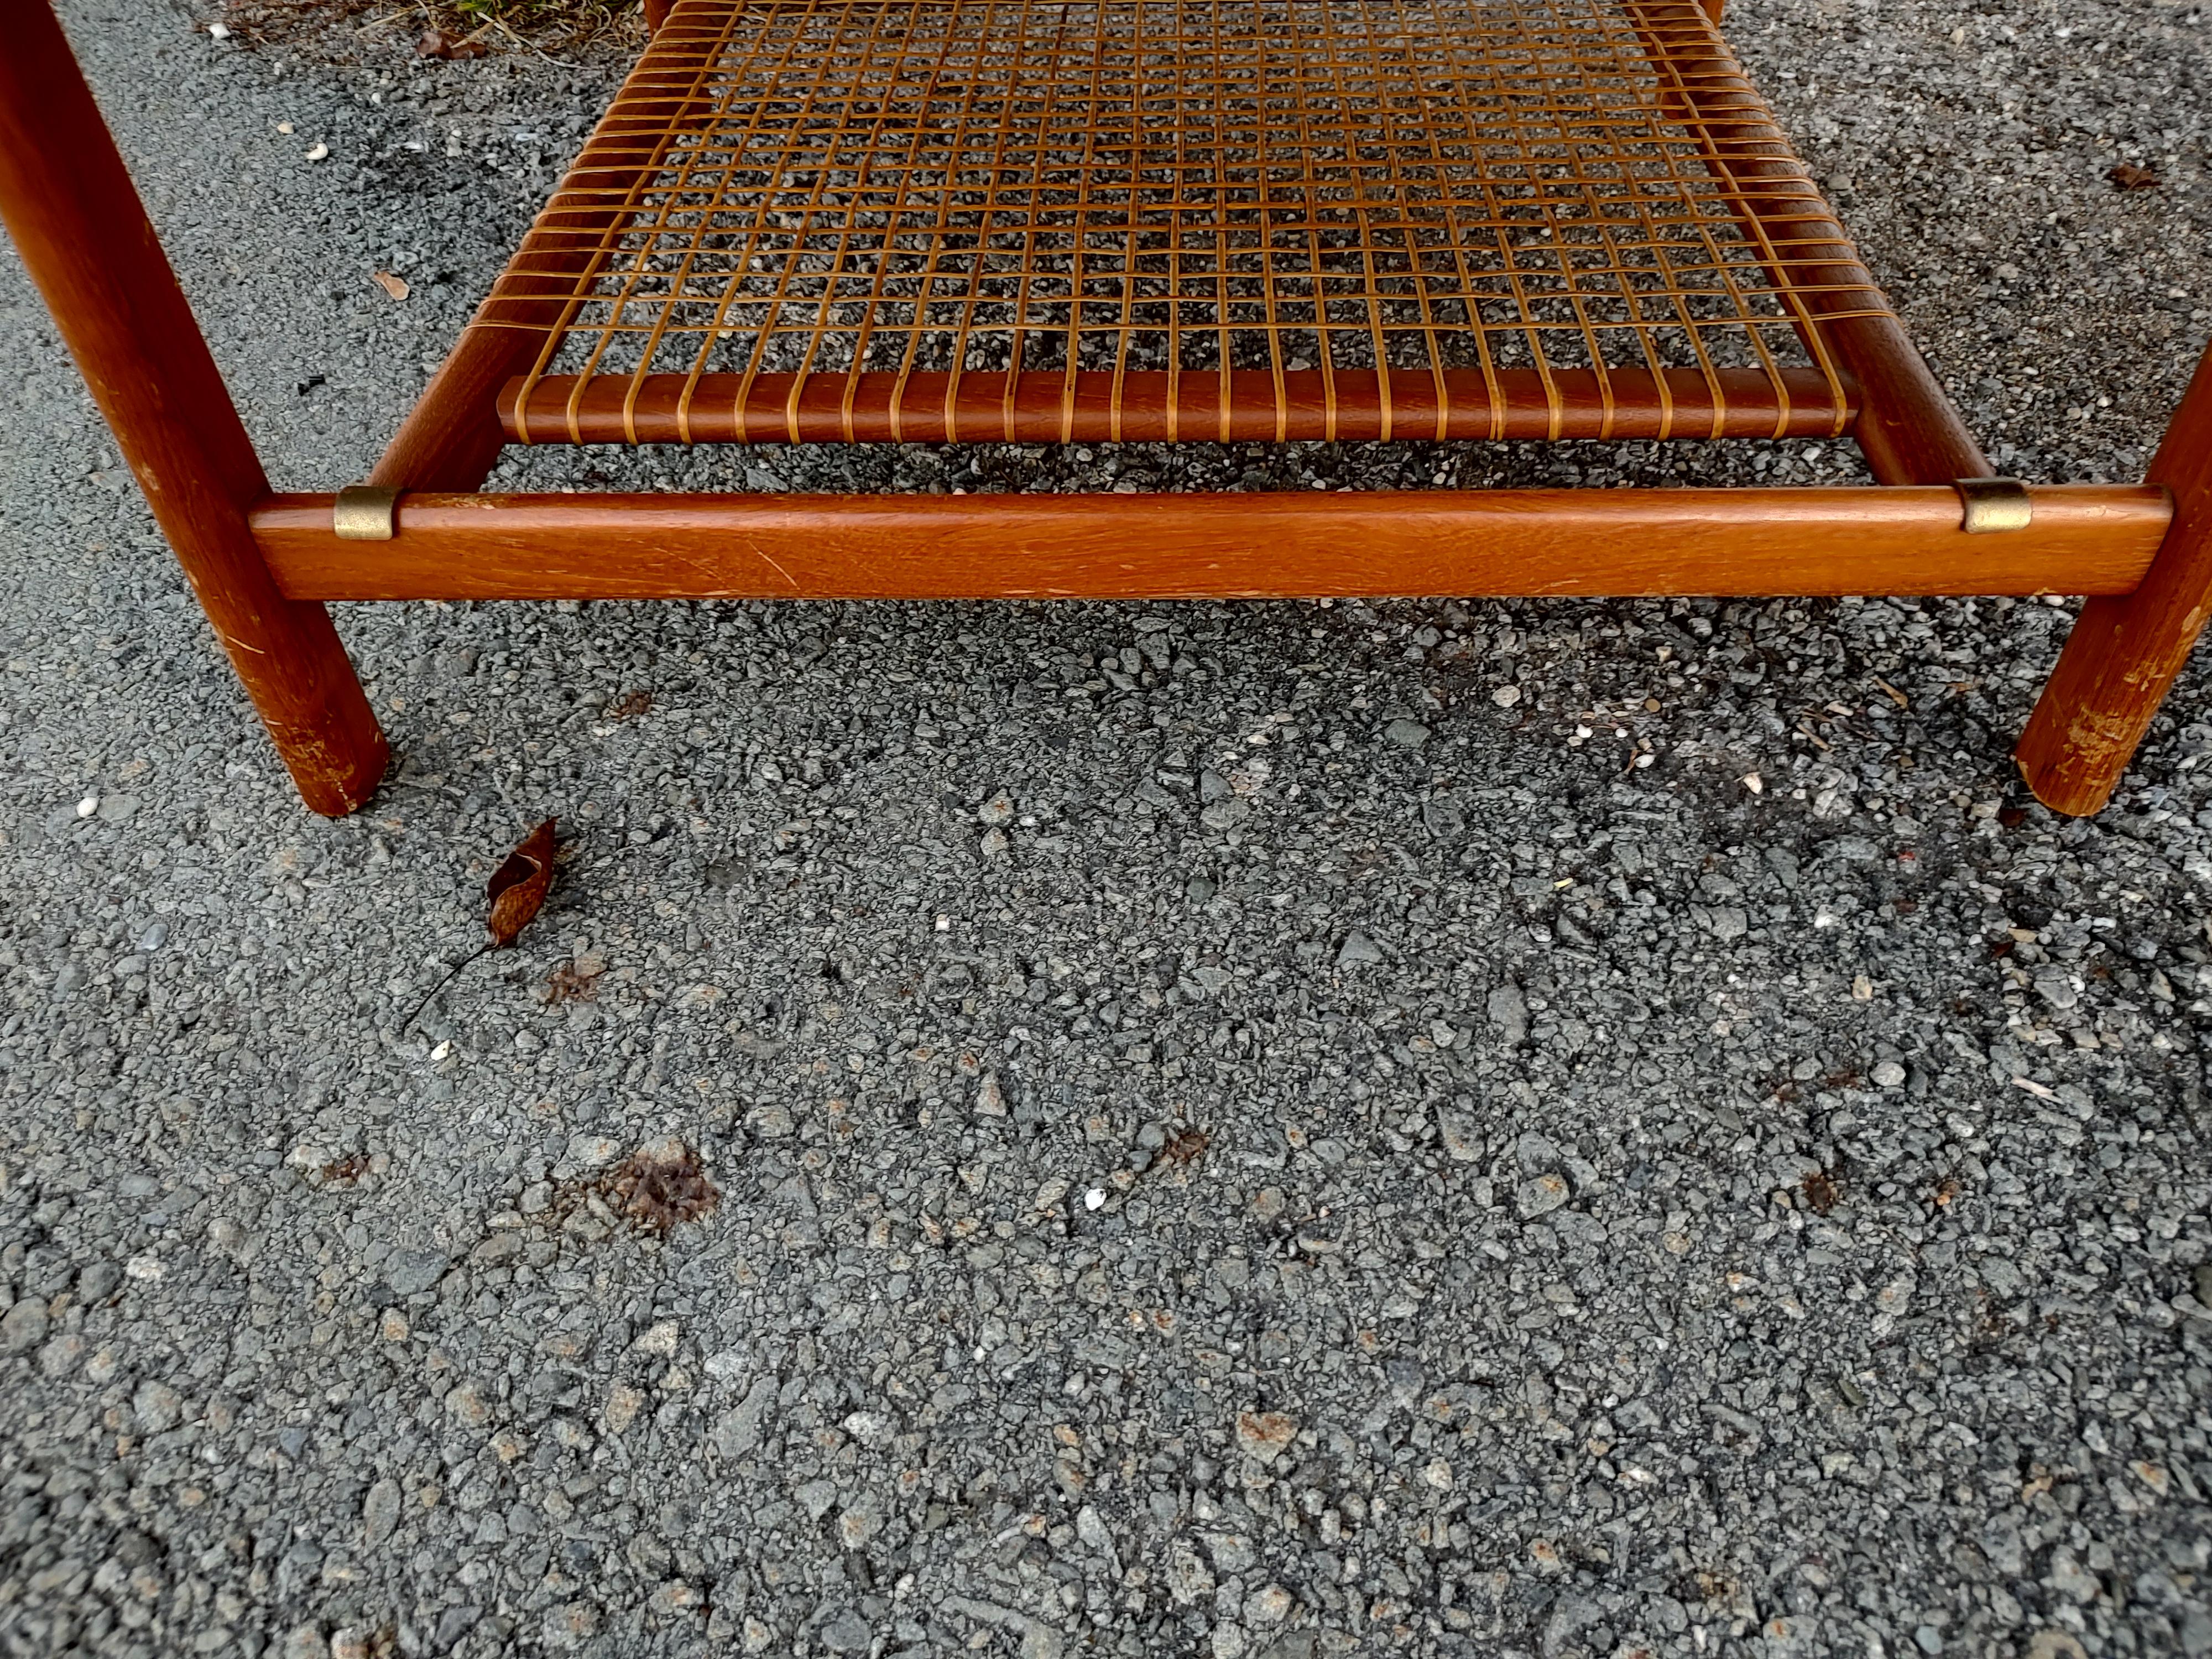 Brass Mid-Century Modern Teak with Woven Shelf Cocktail Table by Dux Sweden - Restored For Sale